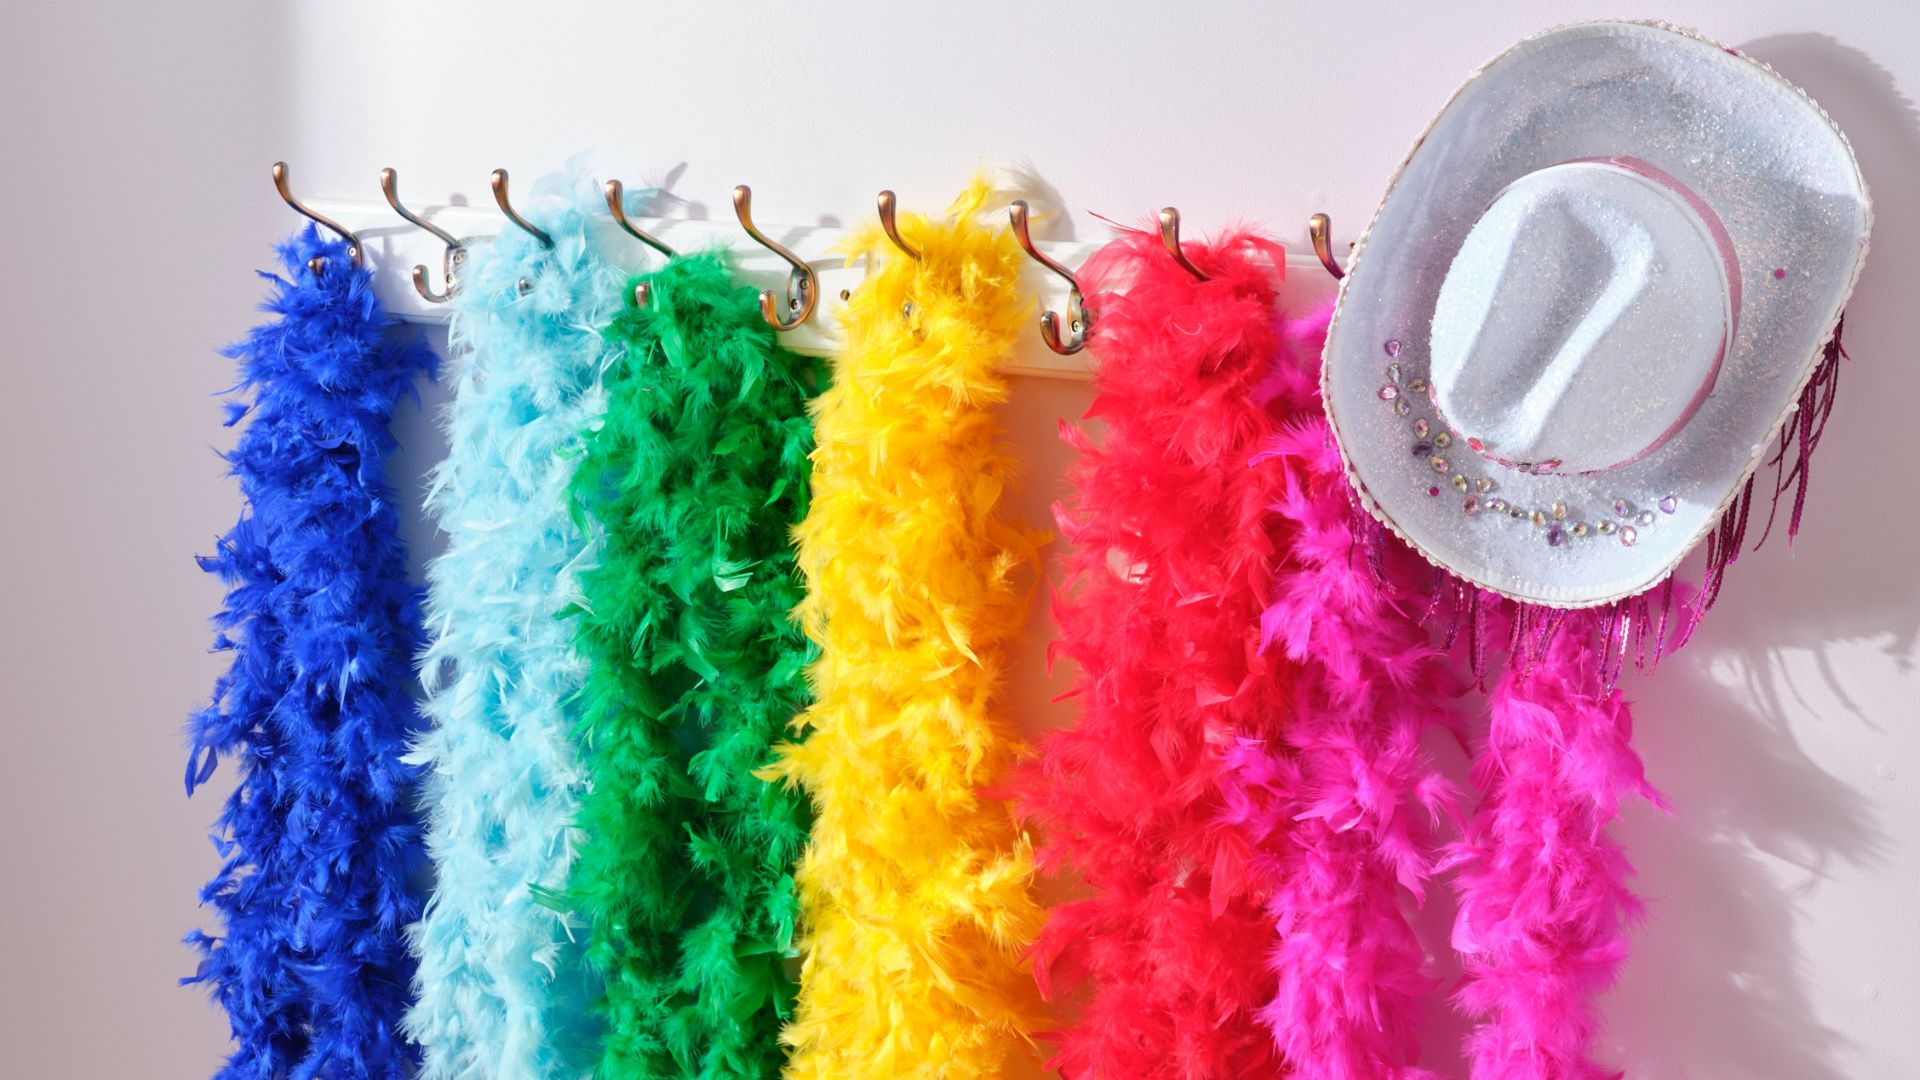 Be concert ready in matching rainbow feather boas with all your friends